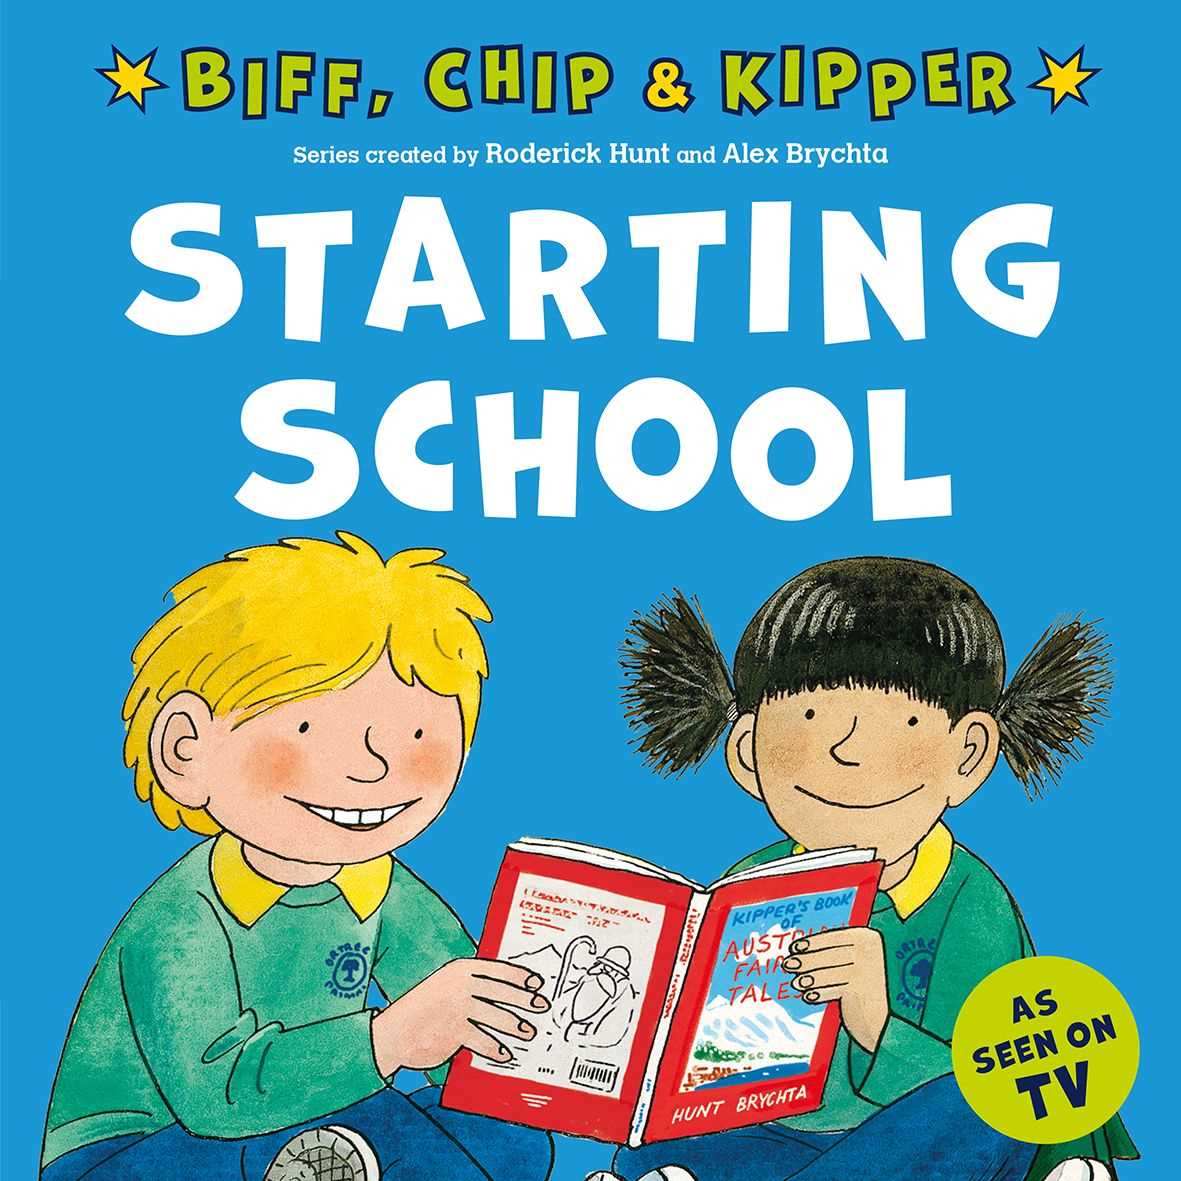 Starting School (First Experiences with Biff, Chip &amp; Kipper)